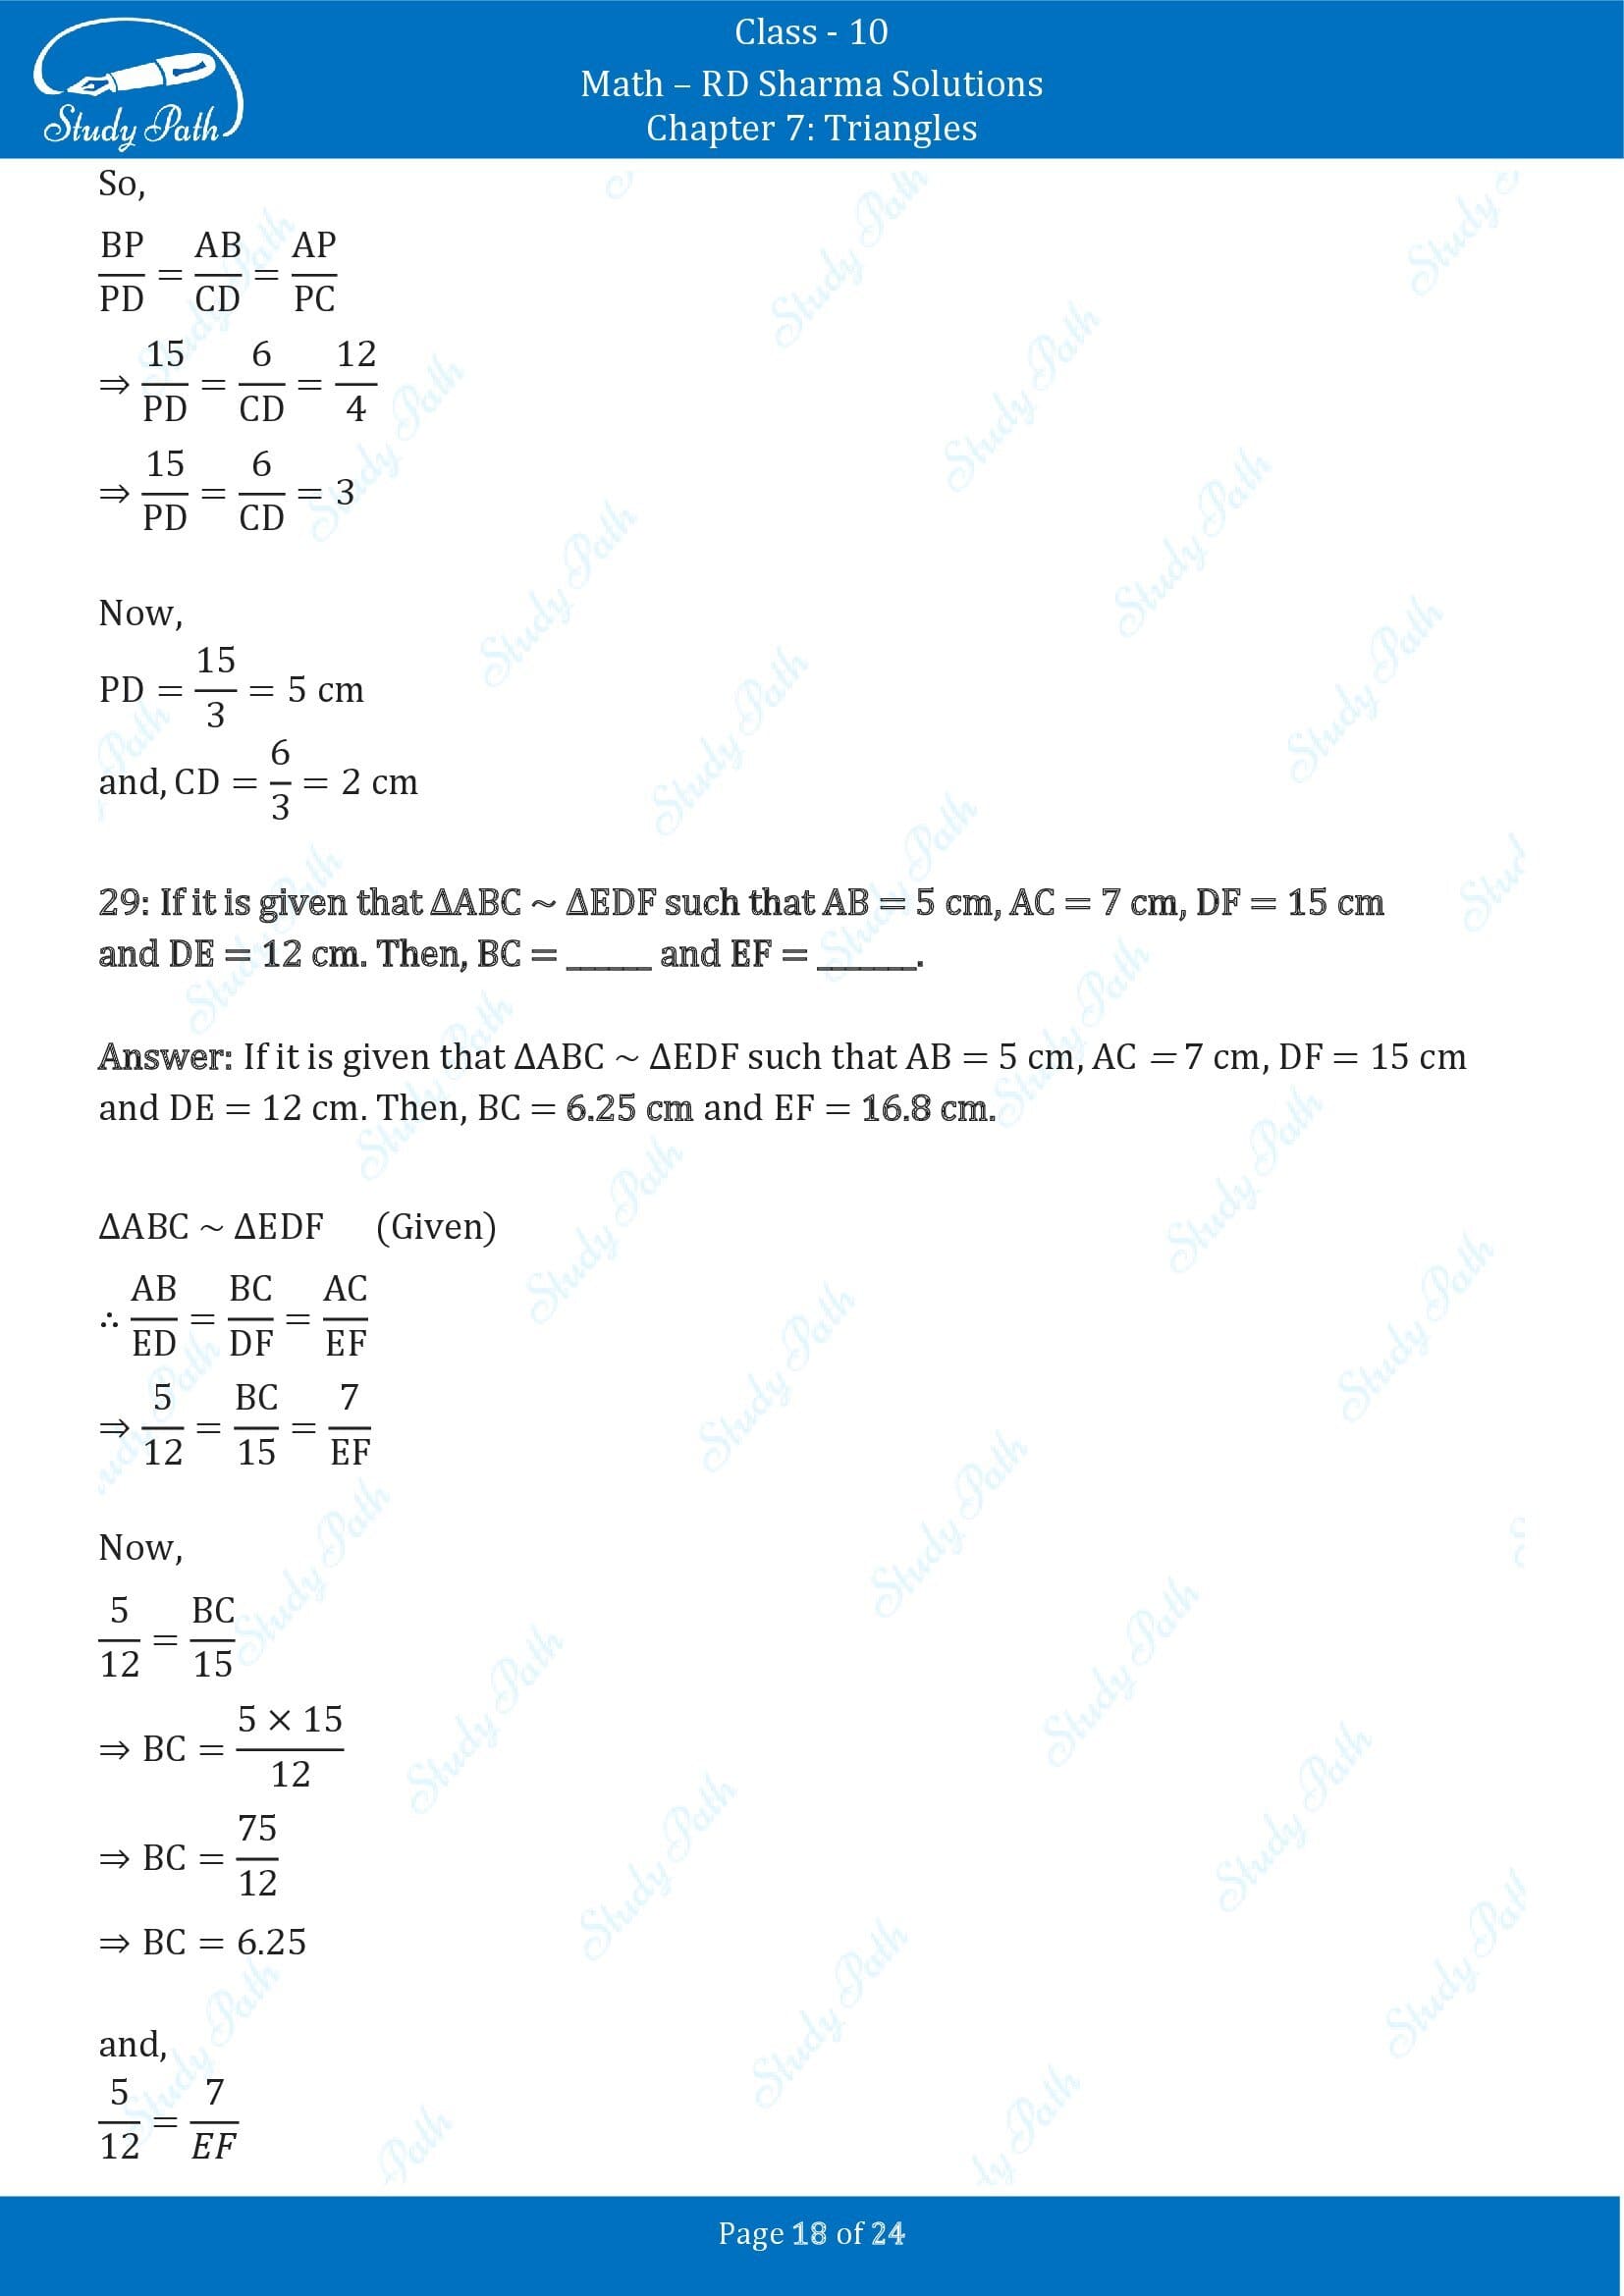 RD Sharma Solutions Class 10 Chapter 7 Triangles Fill in the Blank Type Questions FBQs 00018